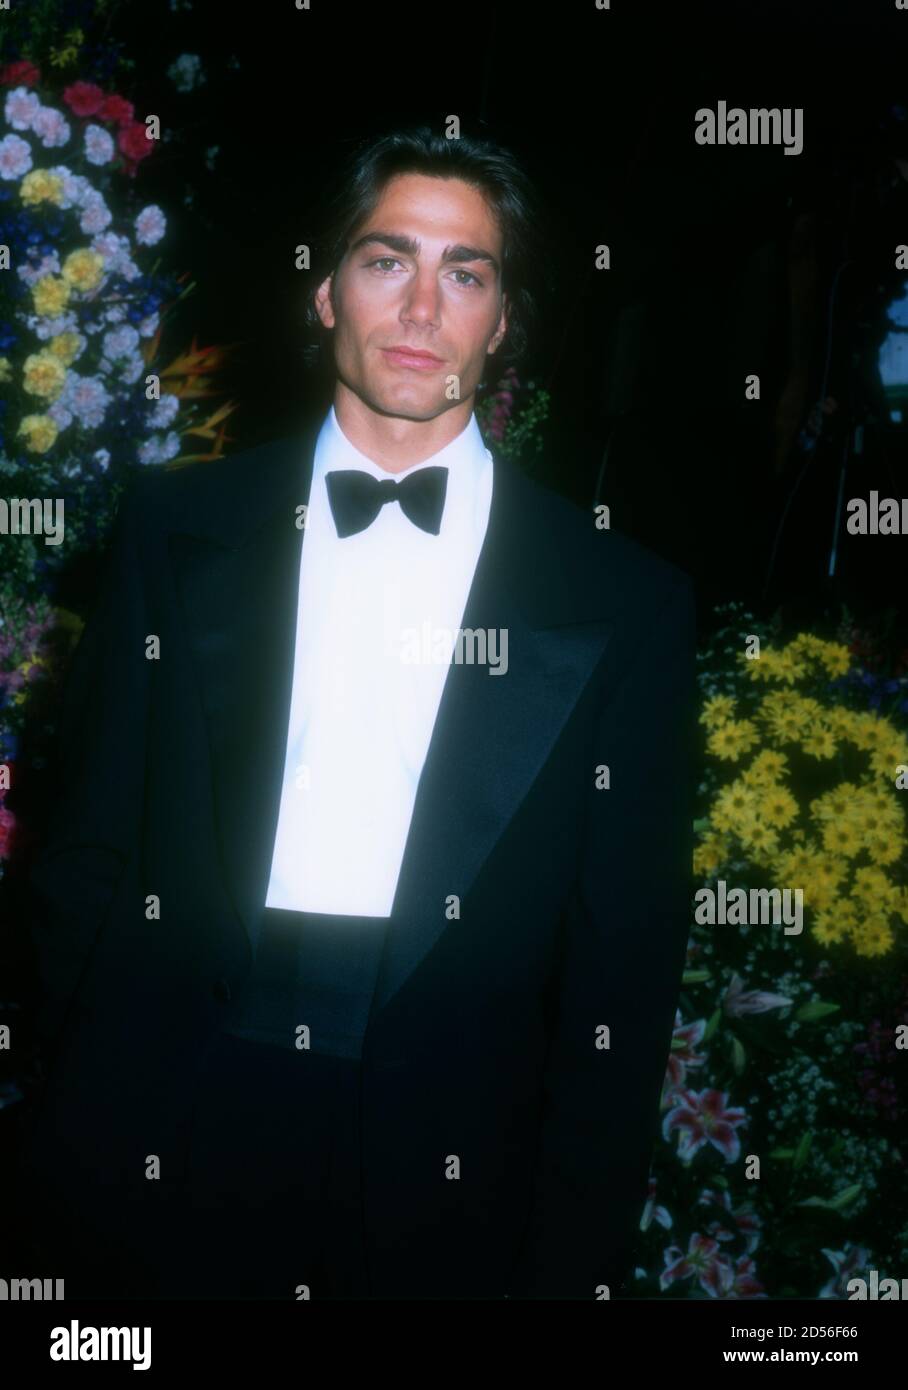 Los Angeles, California, USA 25th March 1996 Model/actor Michael Bergin attends the 68th Annual Academy Awards at Dorothy Chandler Pavilioin on March 25, 1996 in Los Angeles, California, USA. Photo by Barry King/Alamy Stock Photo Stock Photo